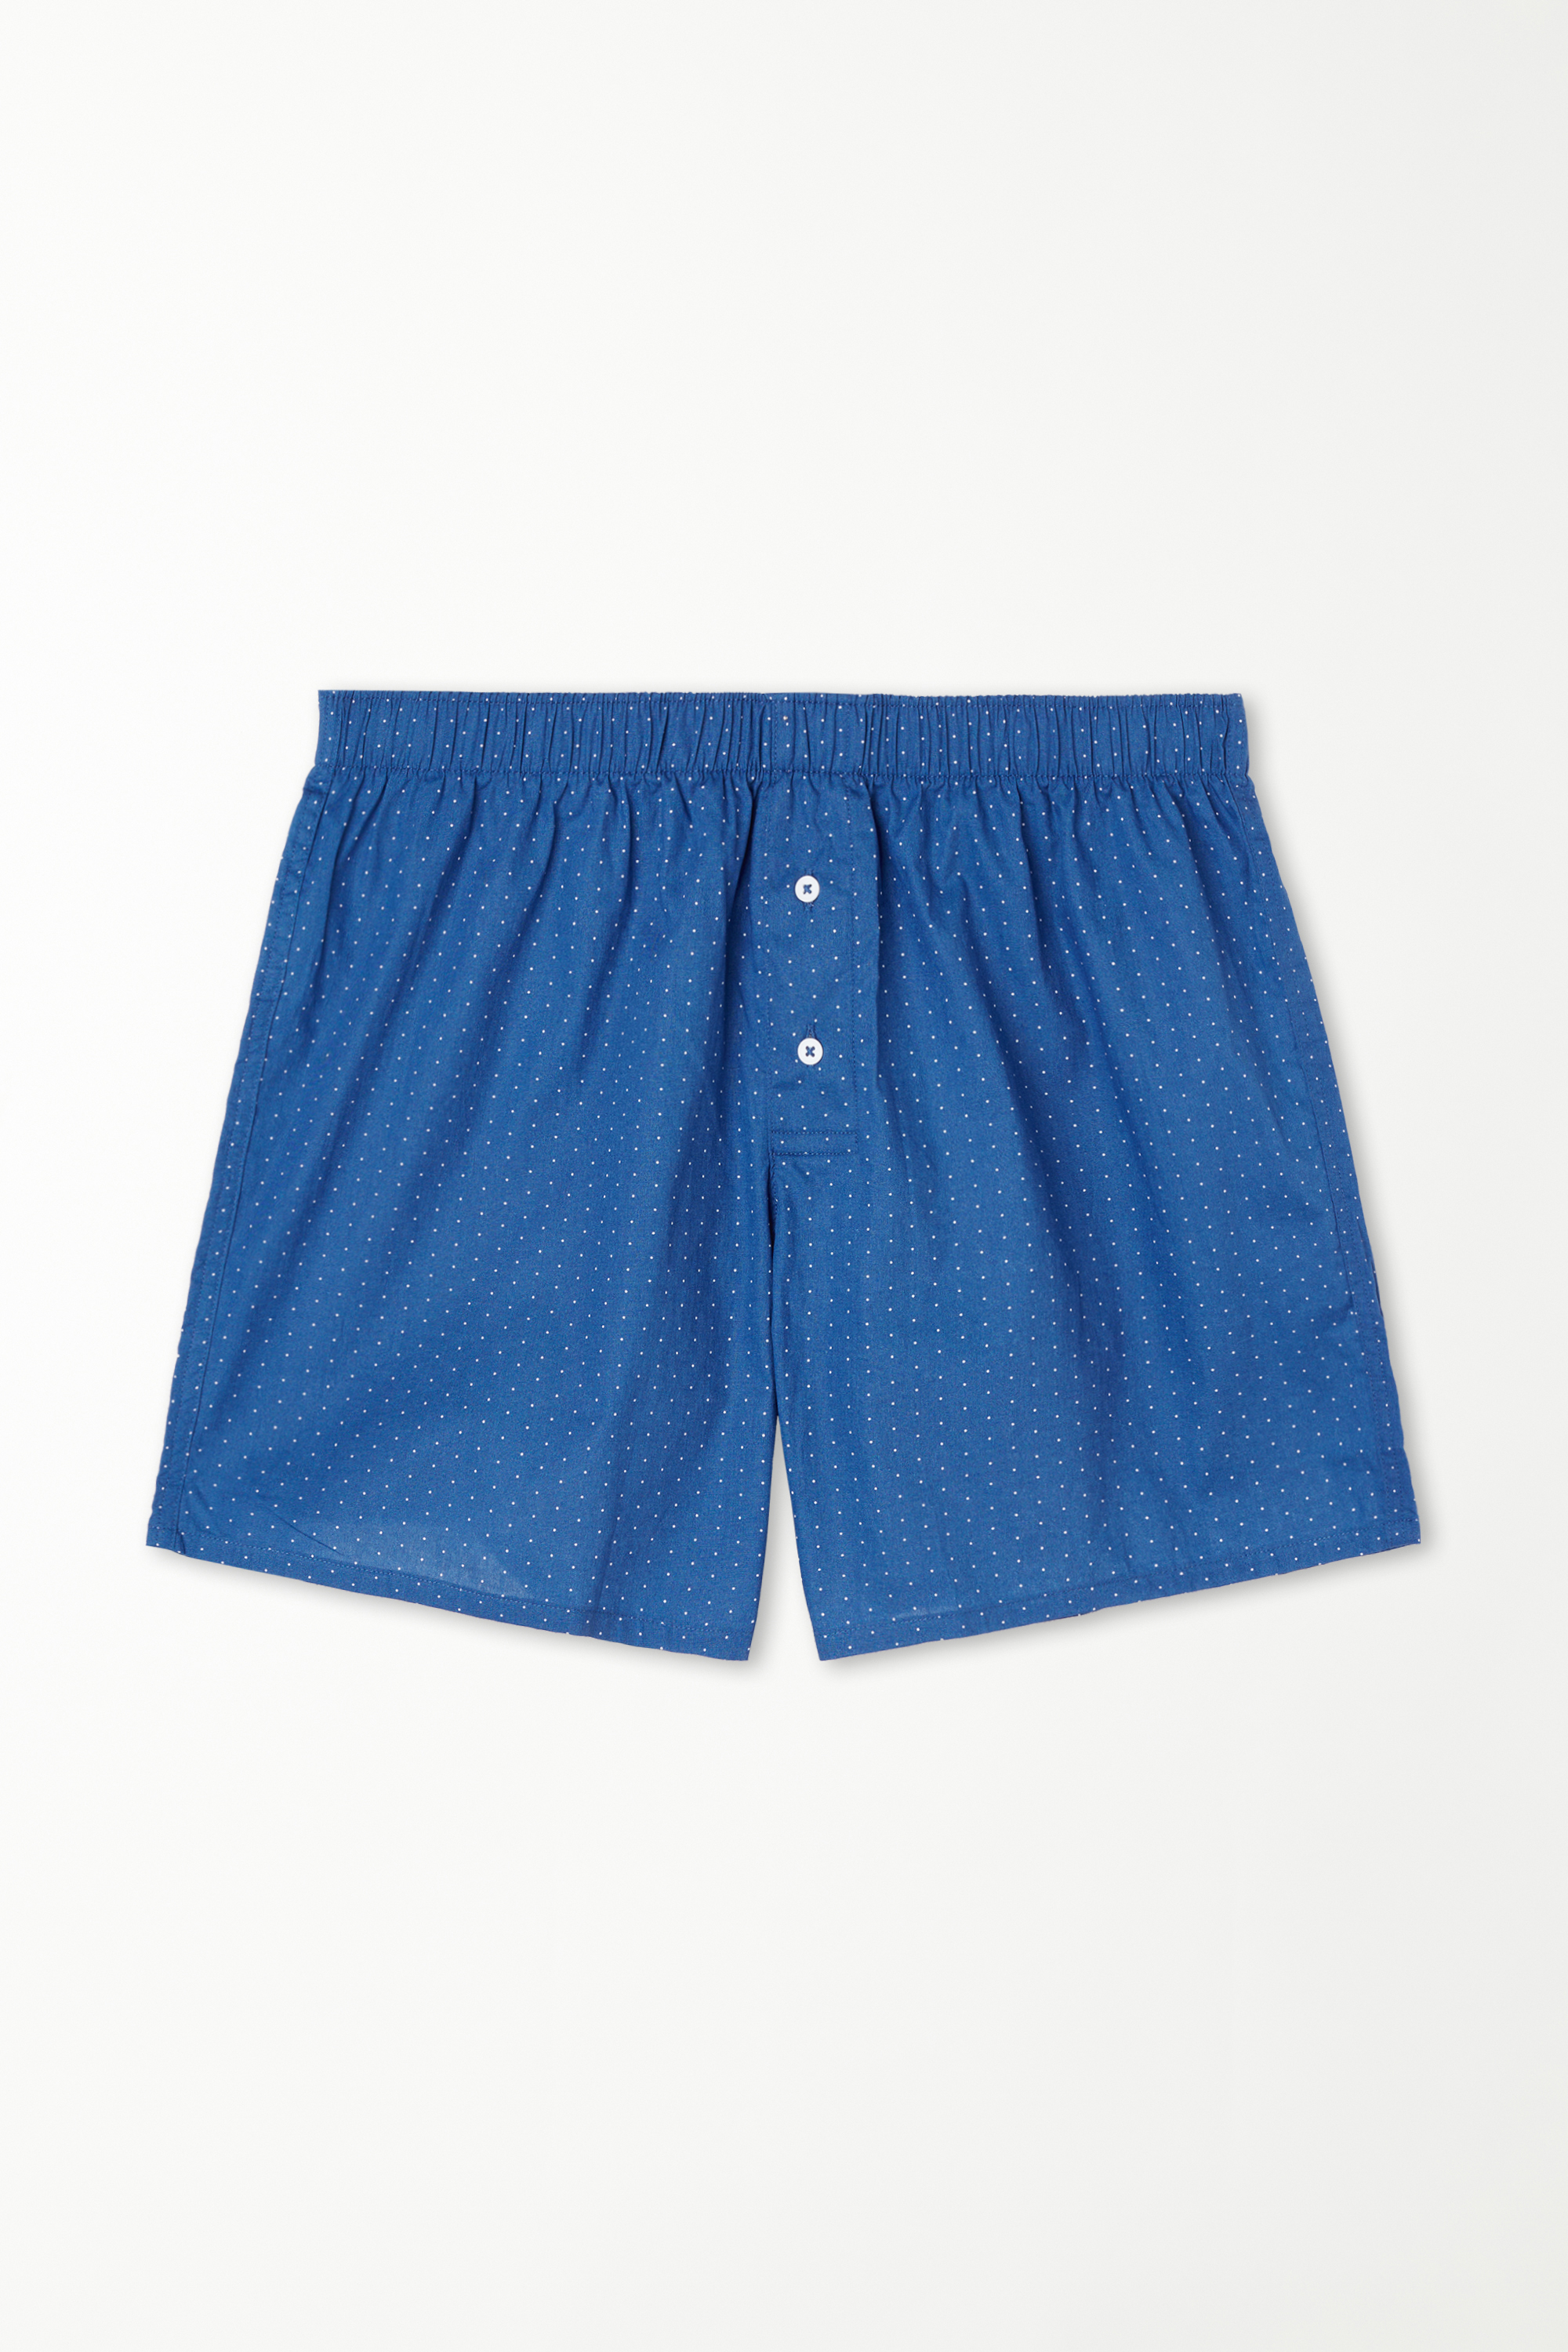 Patterned Cotton Cloth Boxers